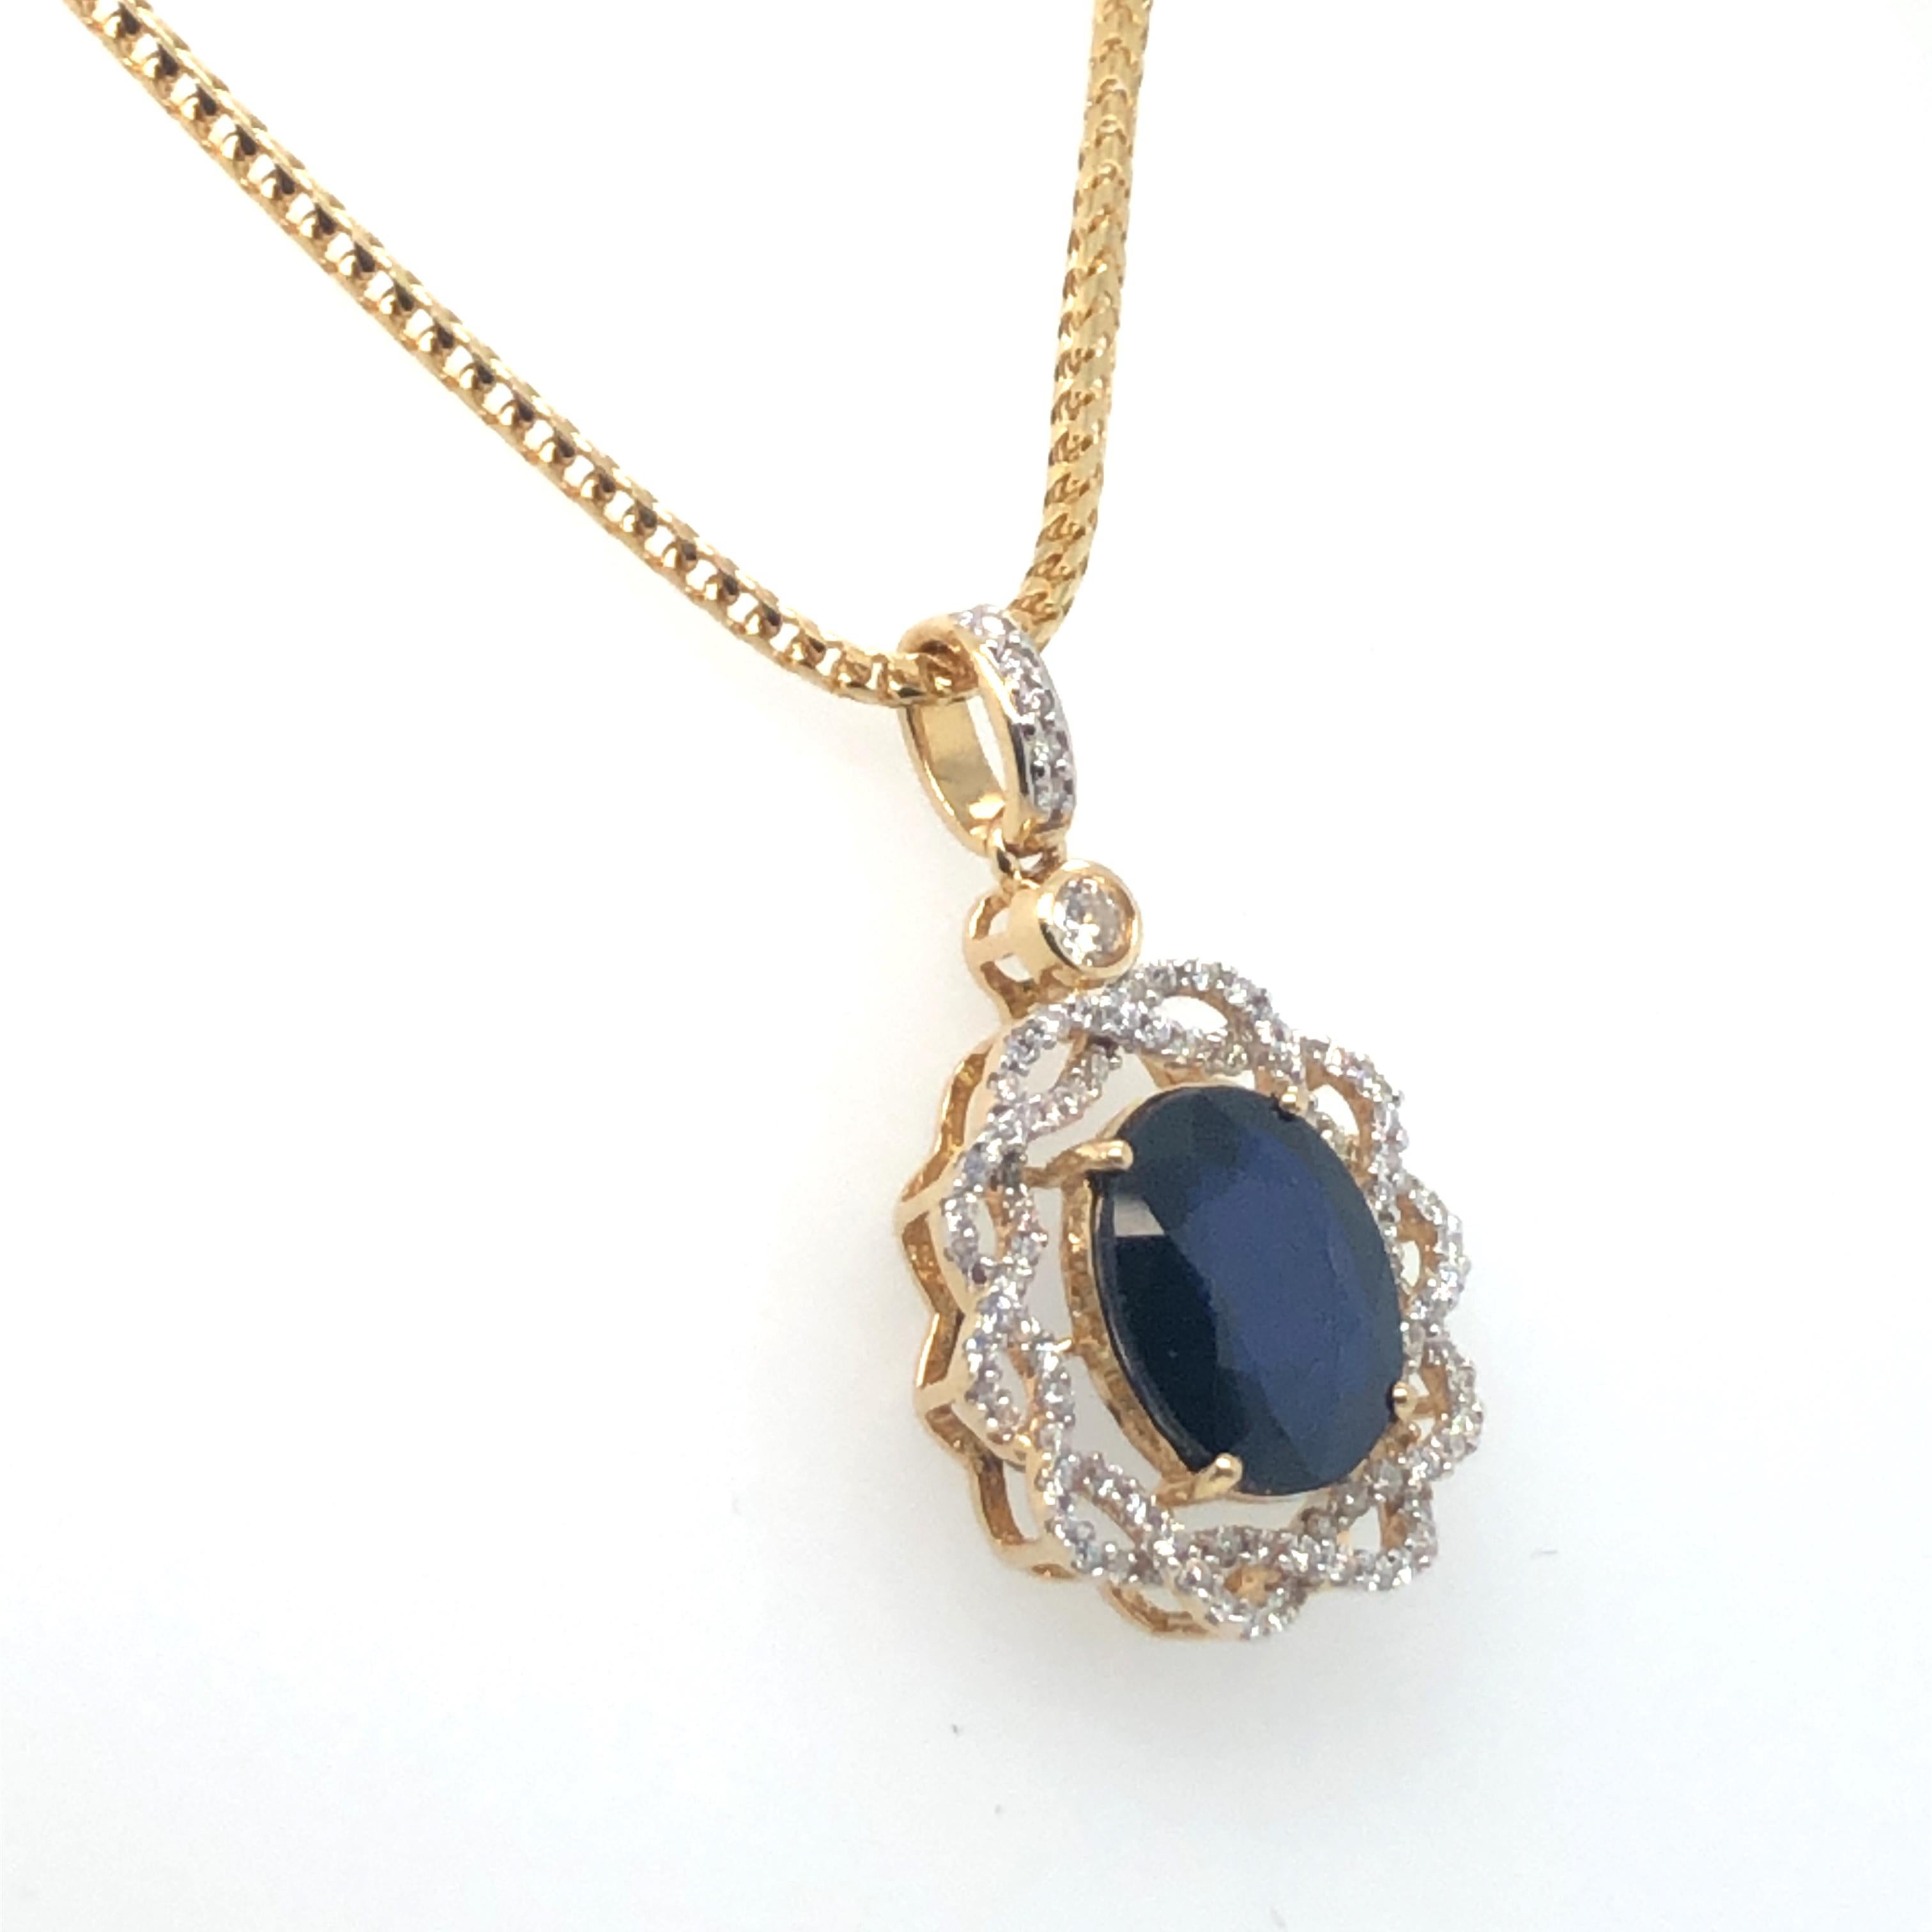 Oval Sapphire & Diamond Pendant 14K Yellow Gold on 18K Yellow Gold Chain. The pendant features an oval cut 4.30ct Sapphire, accented by brilliant cut diamonds. The pendant is on a 16 inch chain that is 1.6mm wide. 
10 Grams
1.25